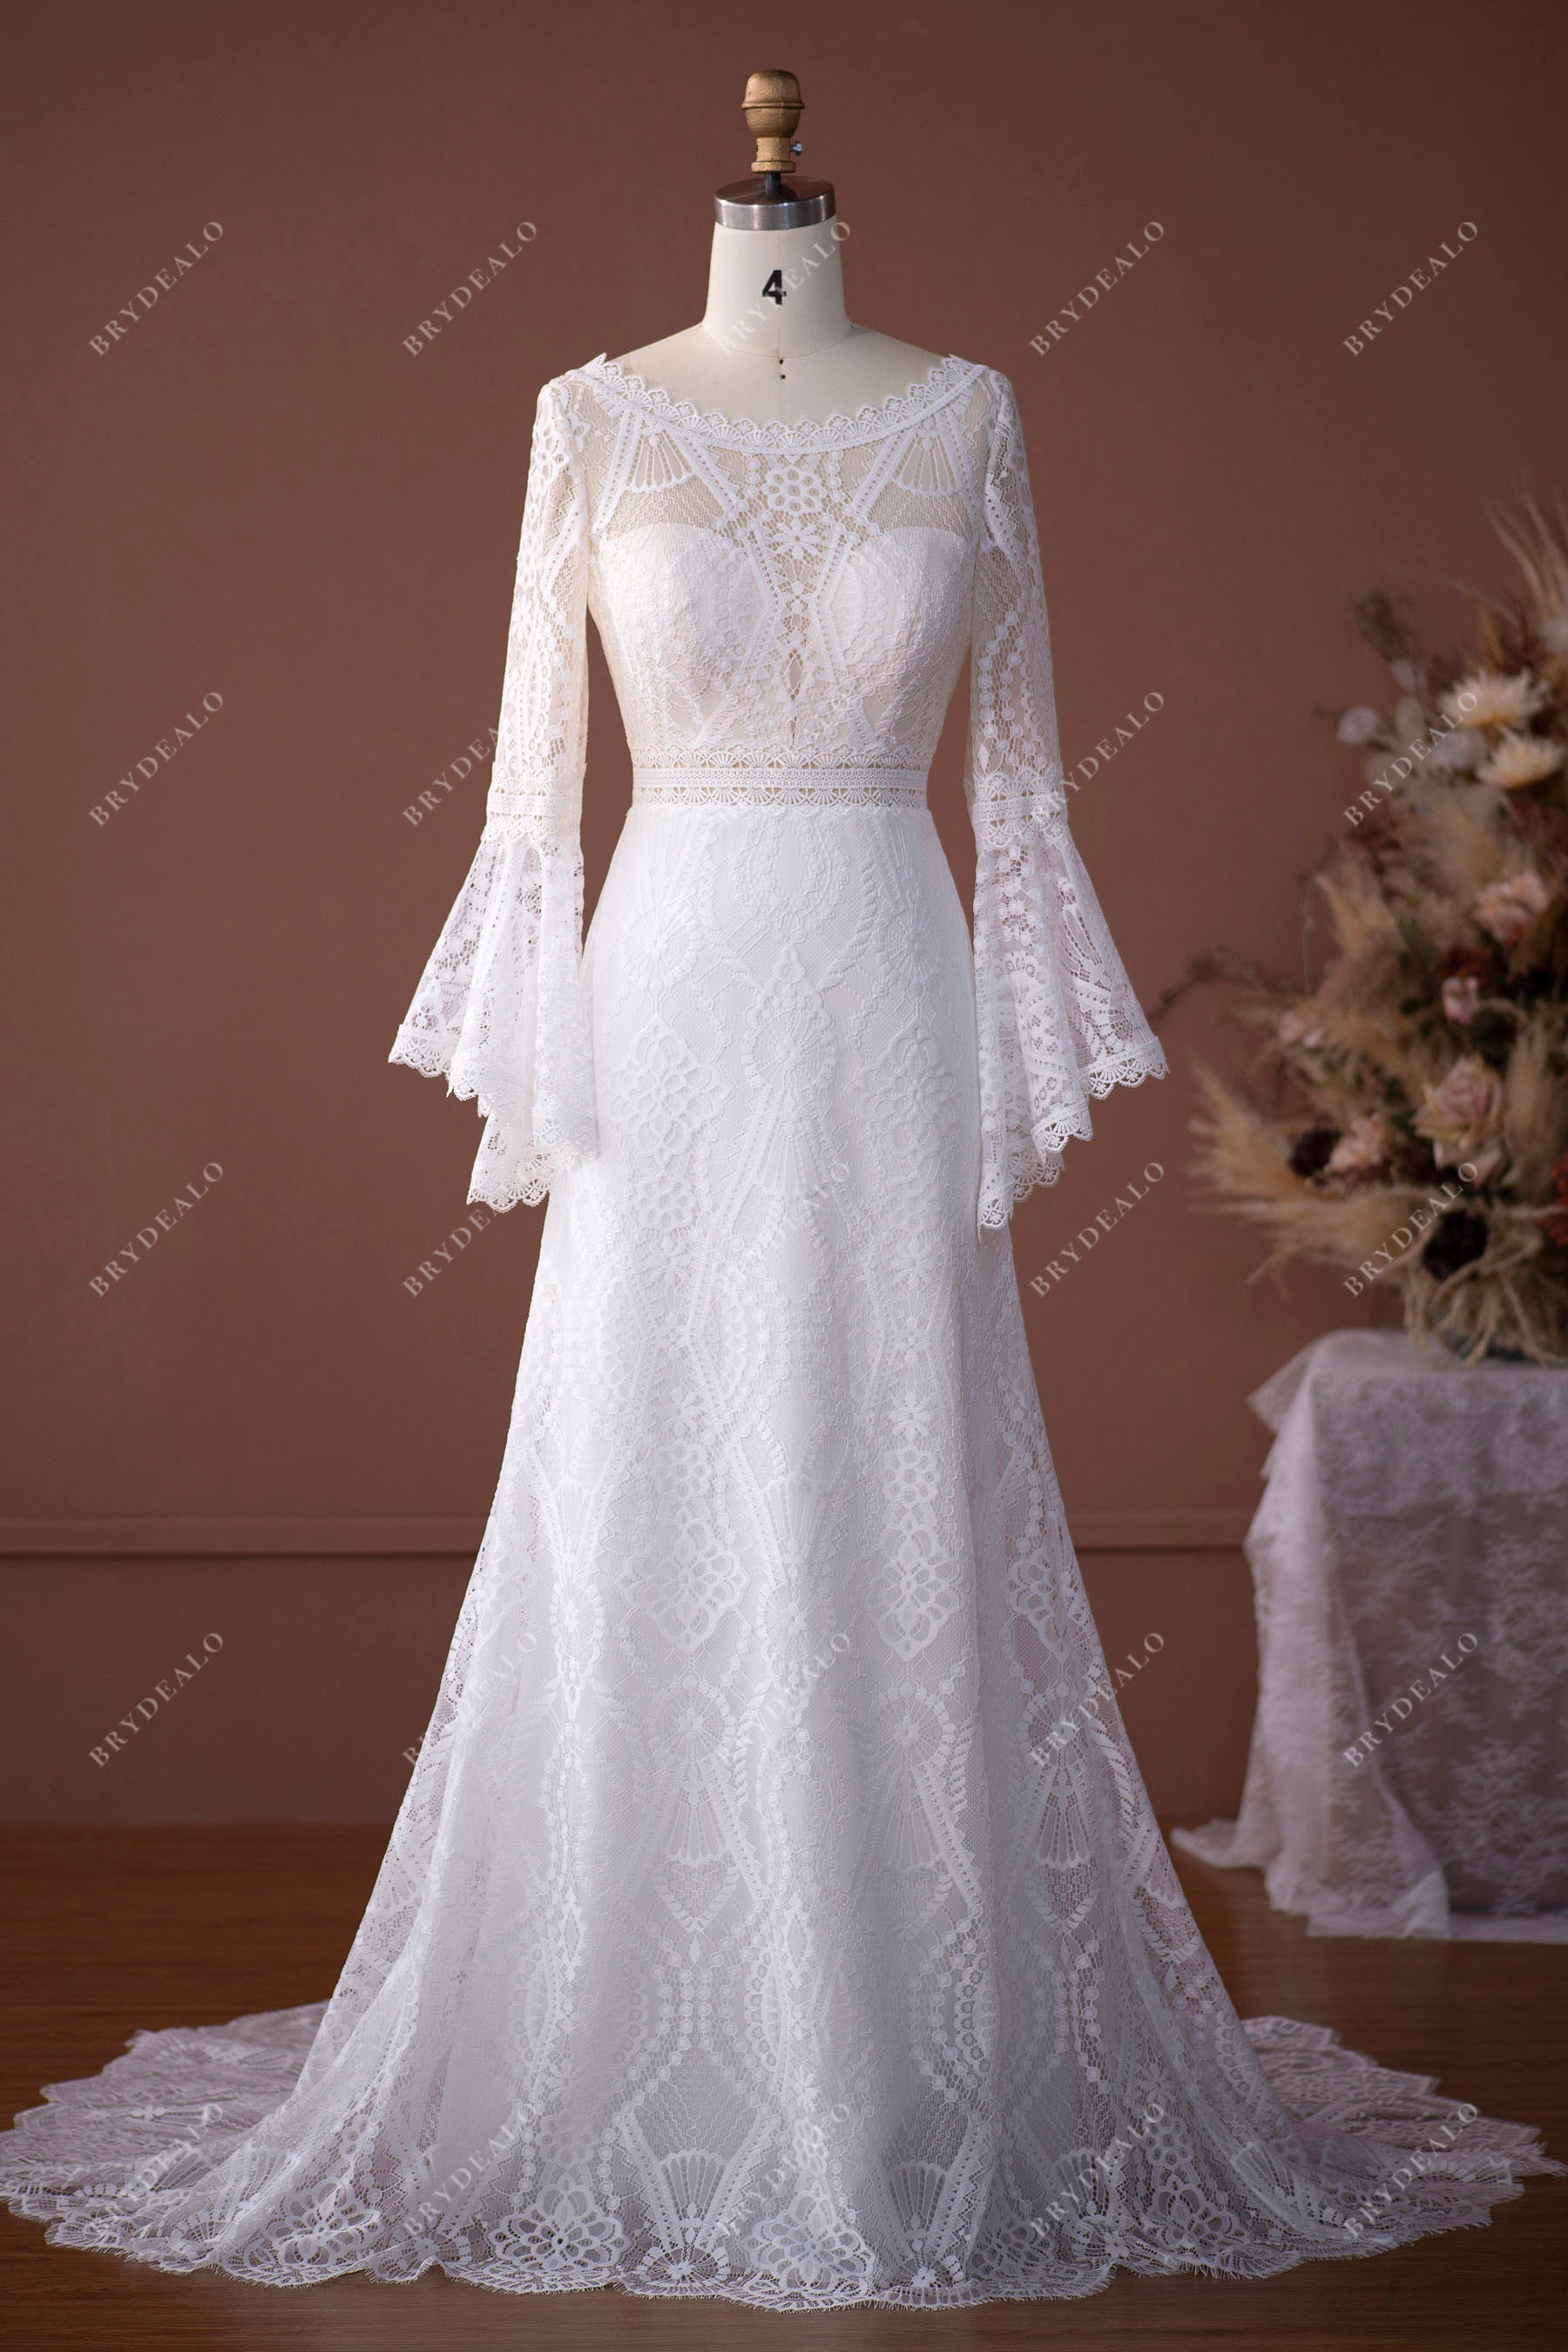 Sample Sale | Lace Bell Sleeves Illusion Scalloped Bridal Dress